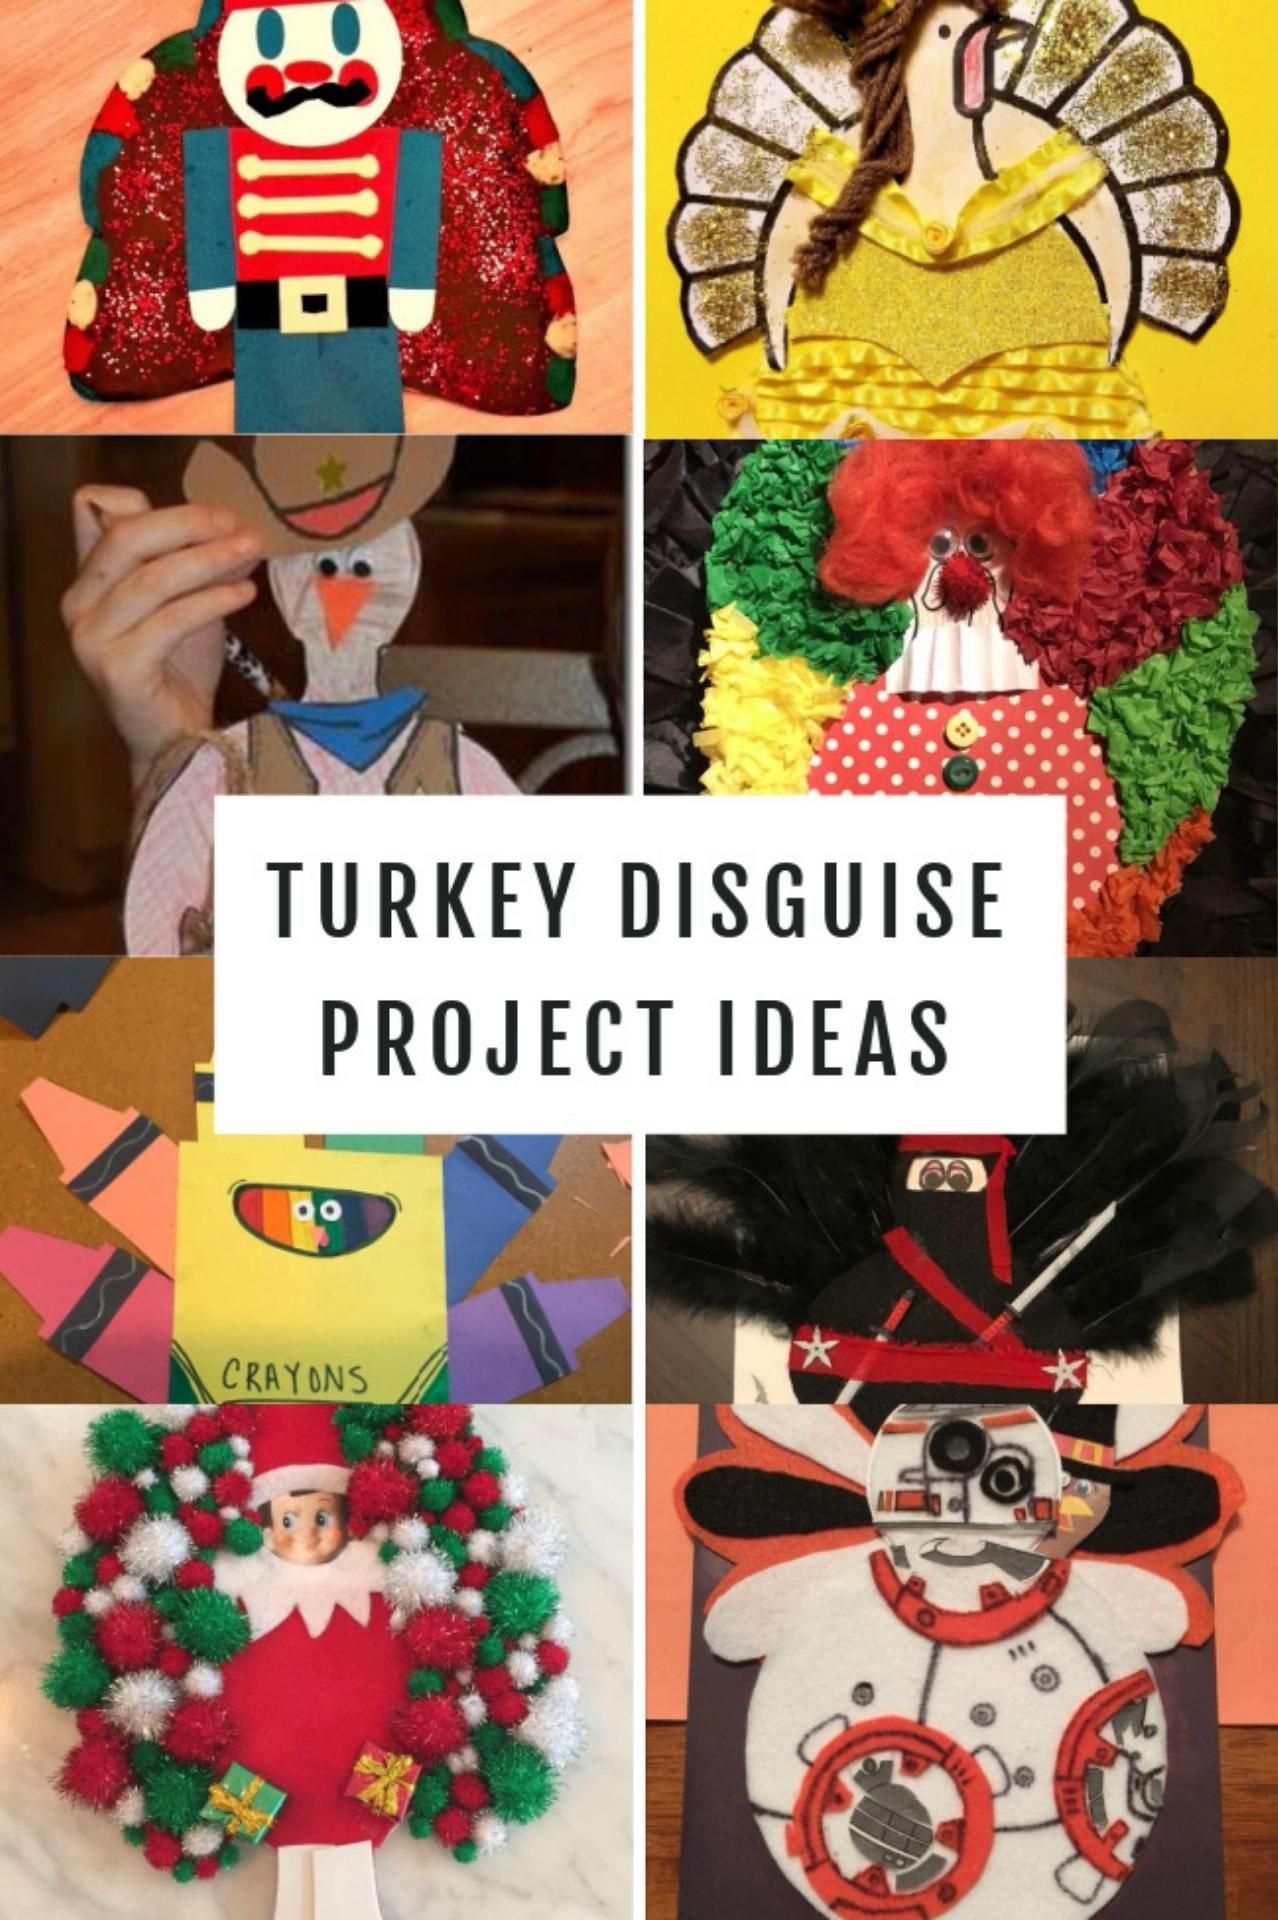 Turkey Disguise Project Ideas -   17 turkey disguise project template ideas